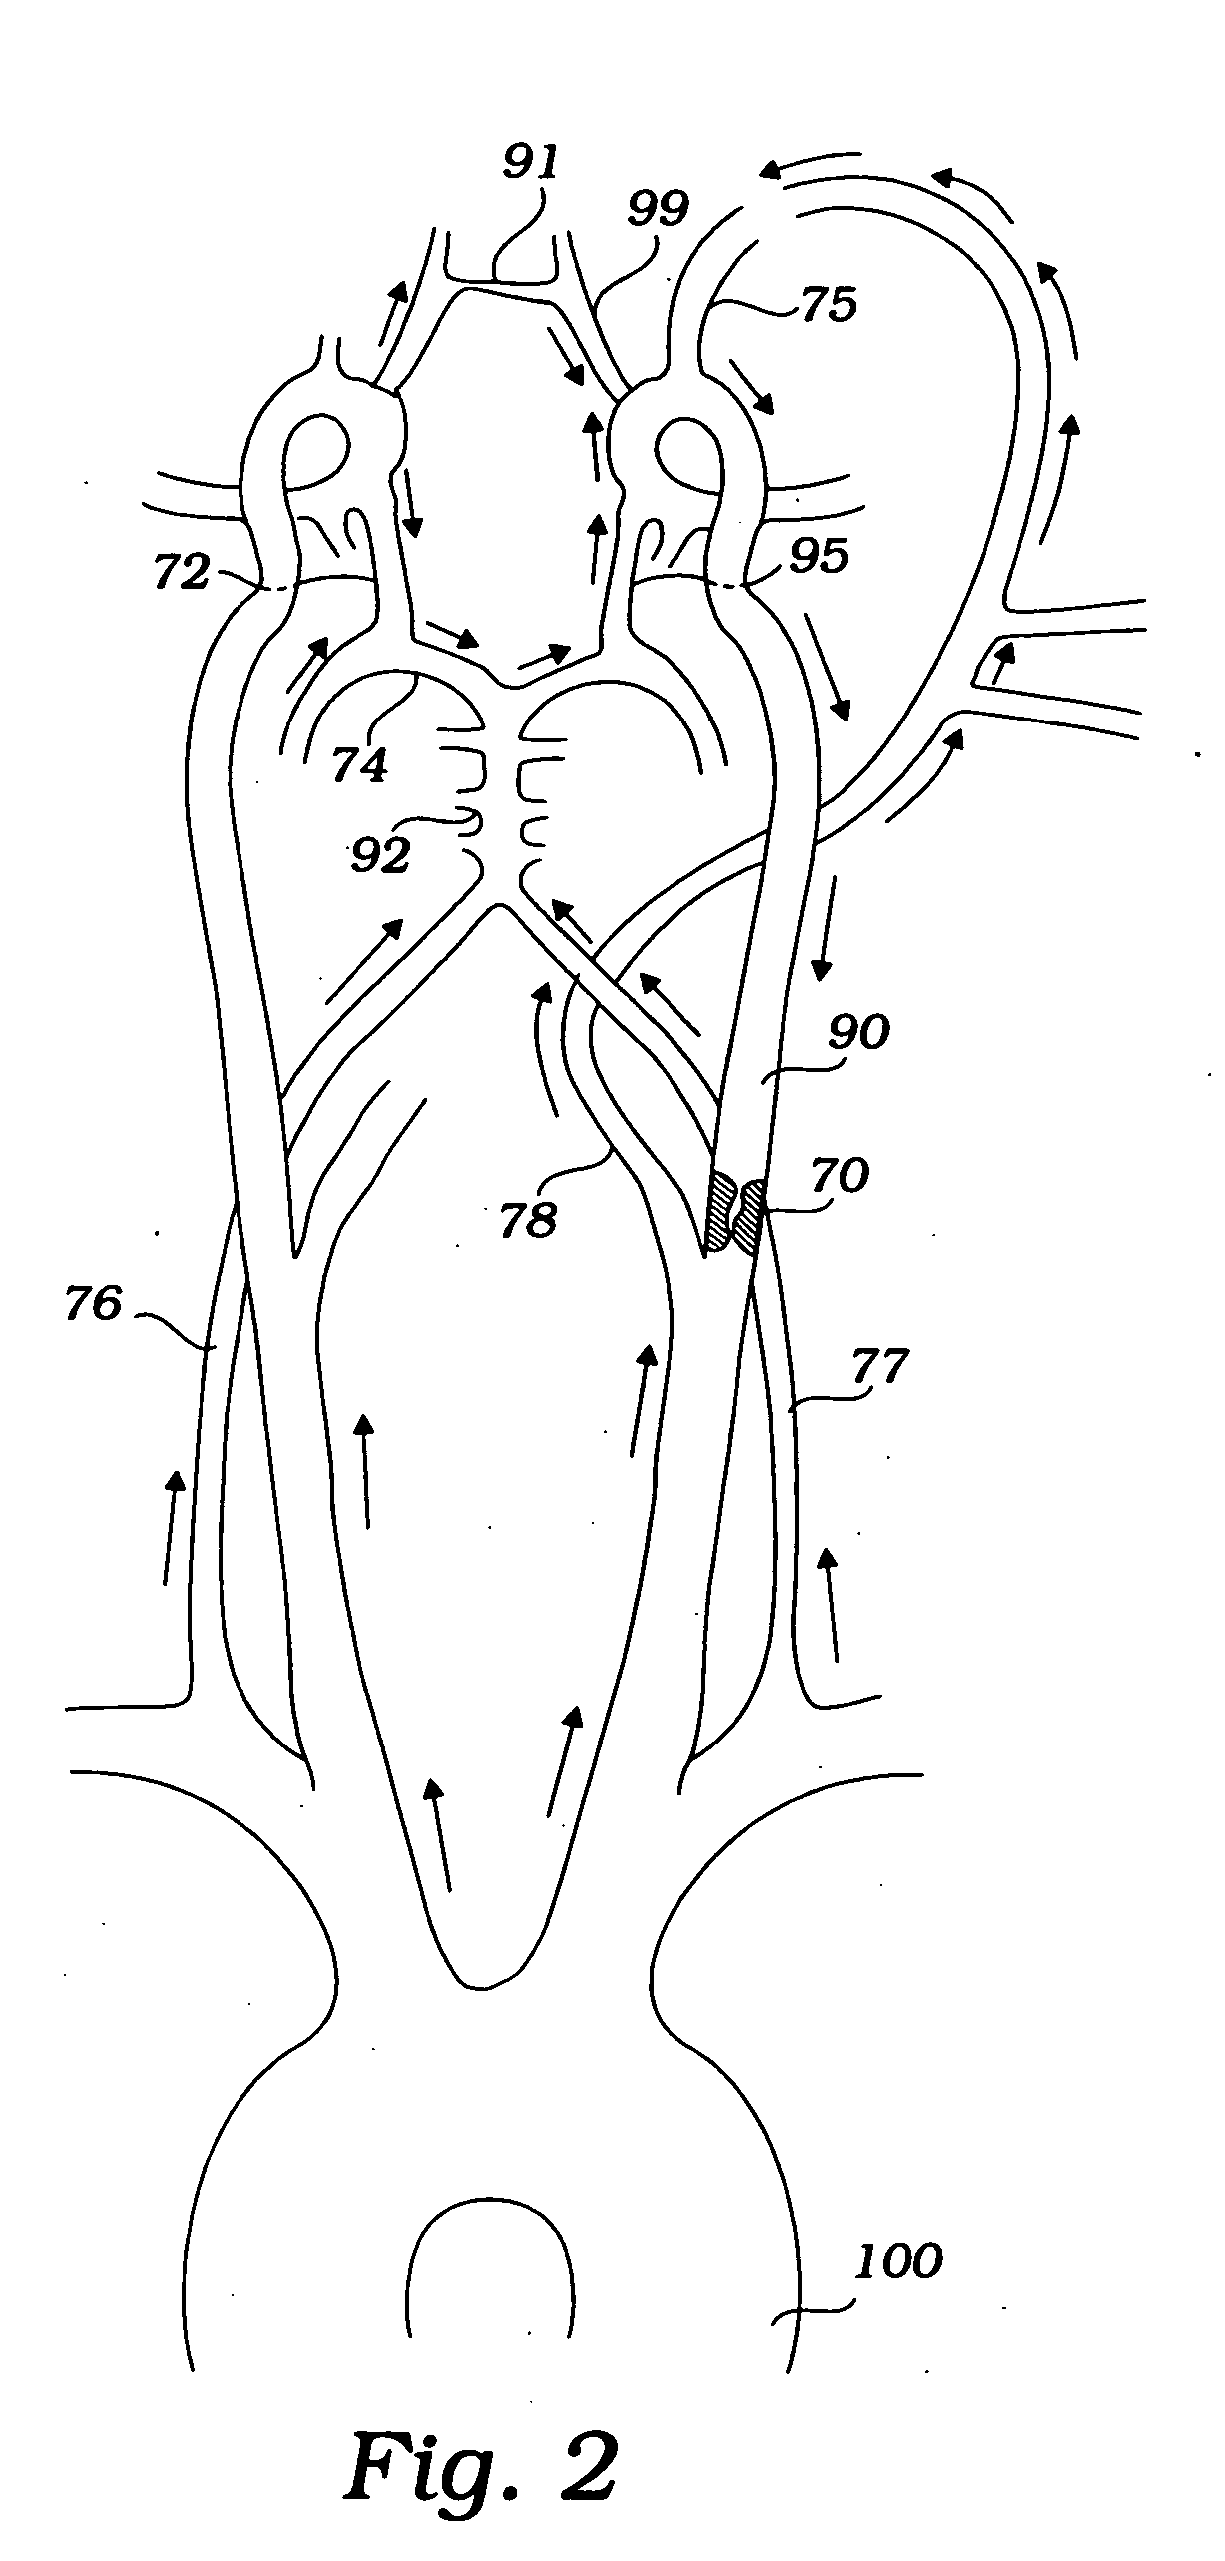 Devices and methods for preventing distal embolization using flow reversal and perfusion augmentation within the cerebral vasculature